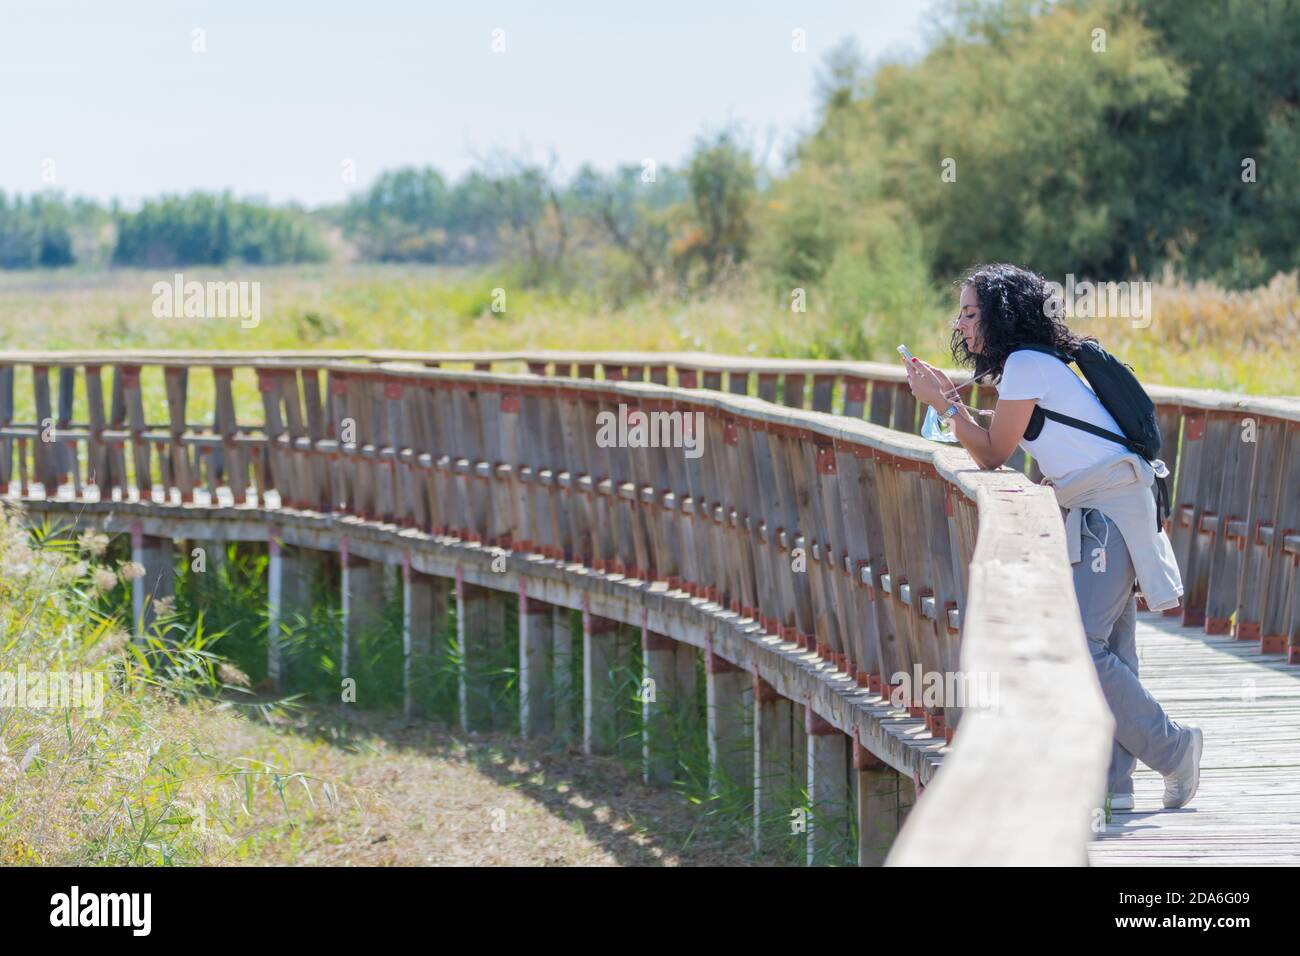 young hiker woman with curly black hair looking at her cellphone while taking a walk on a wooden bridge on a sunny day Stock Photo